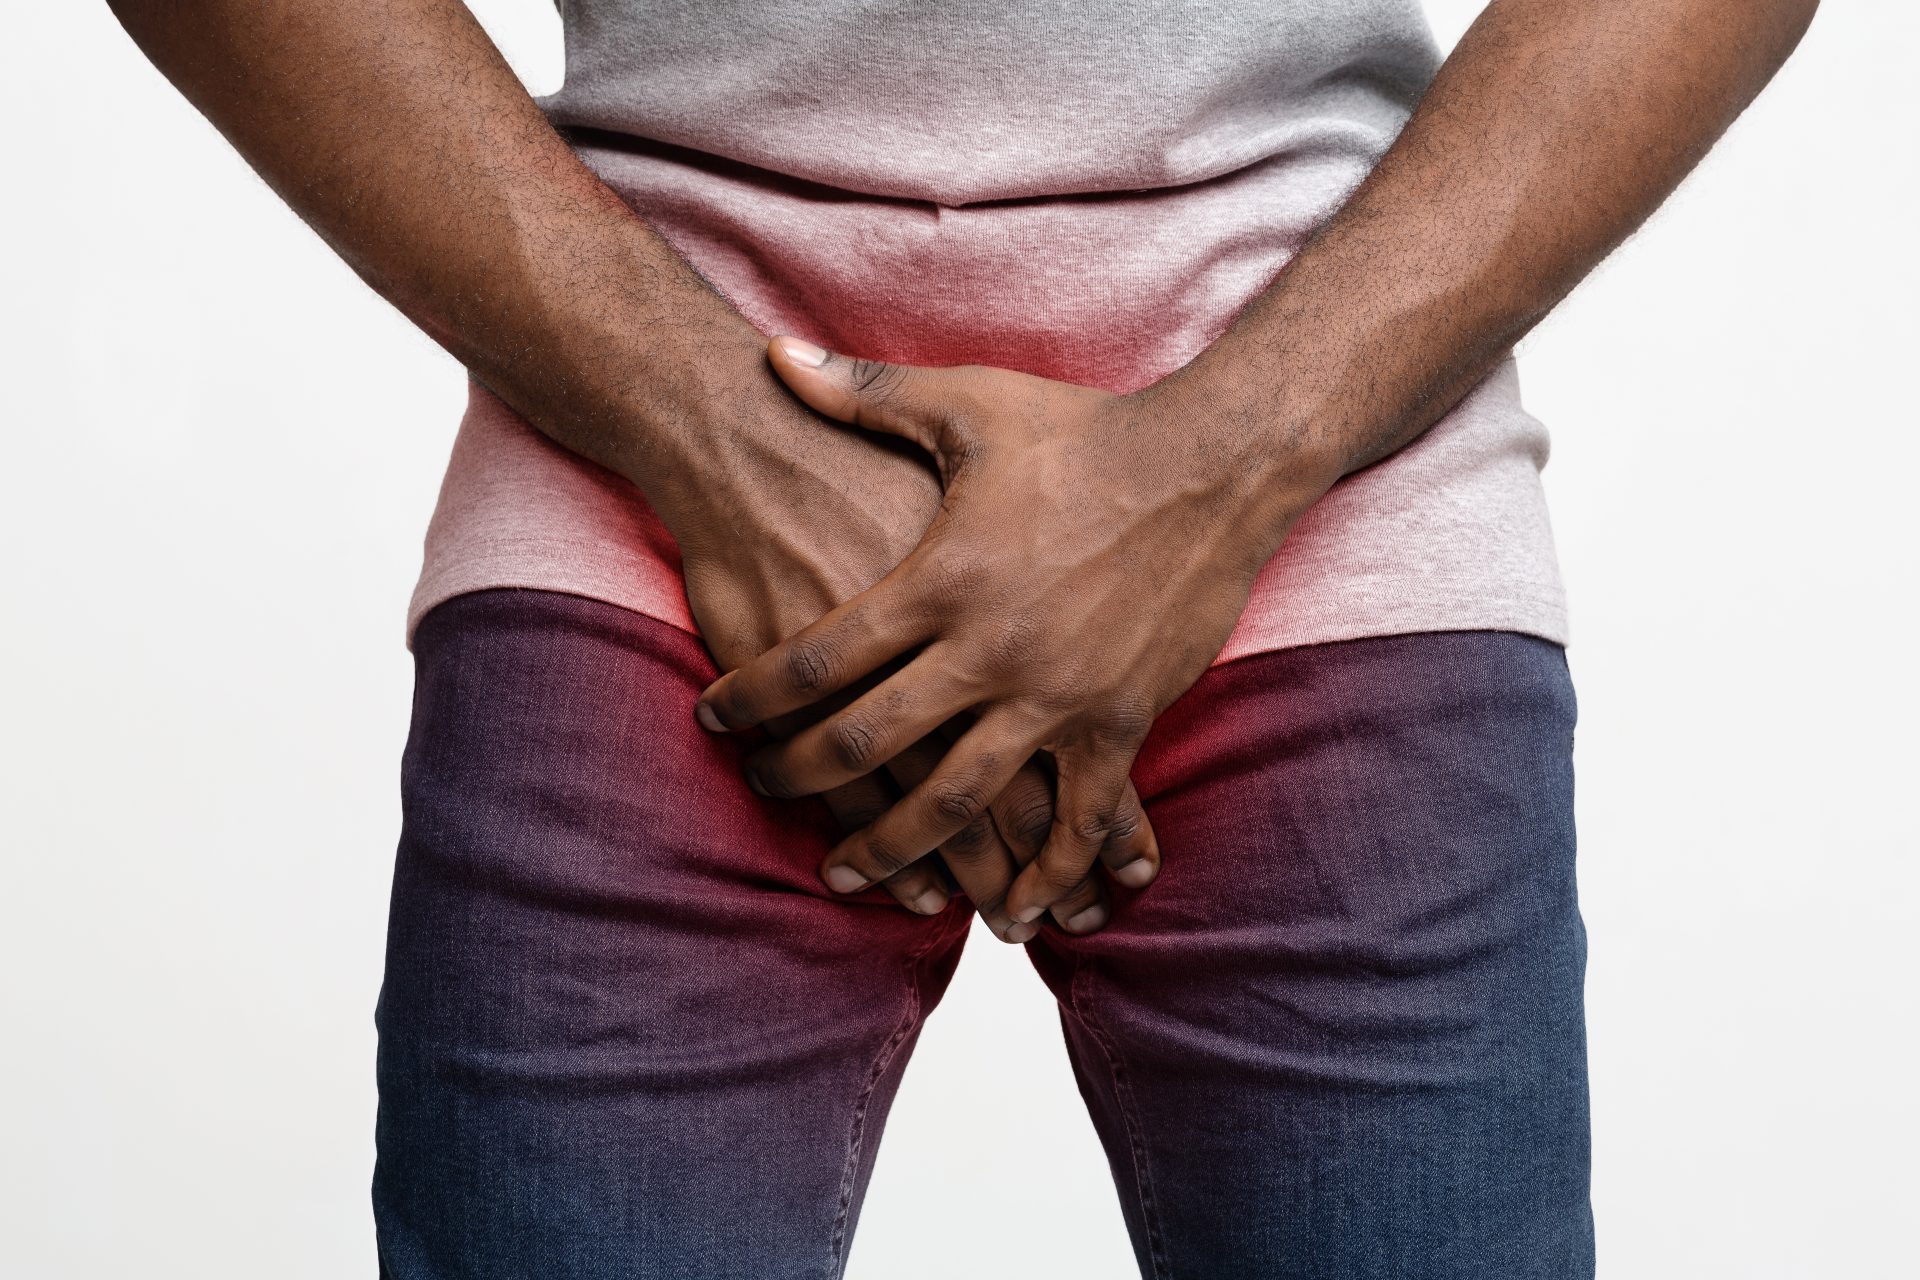 How to prevent Impotence?